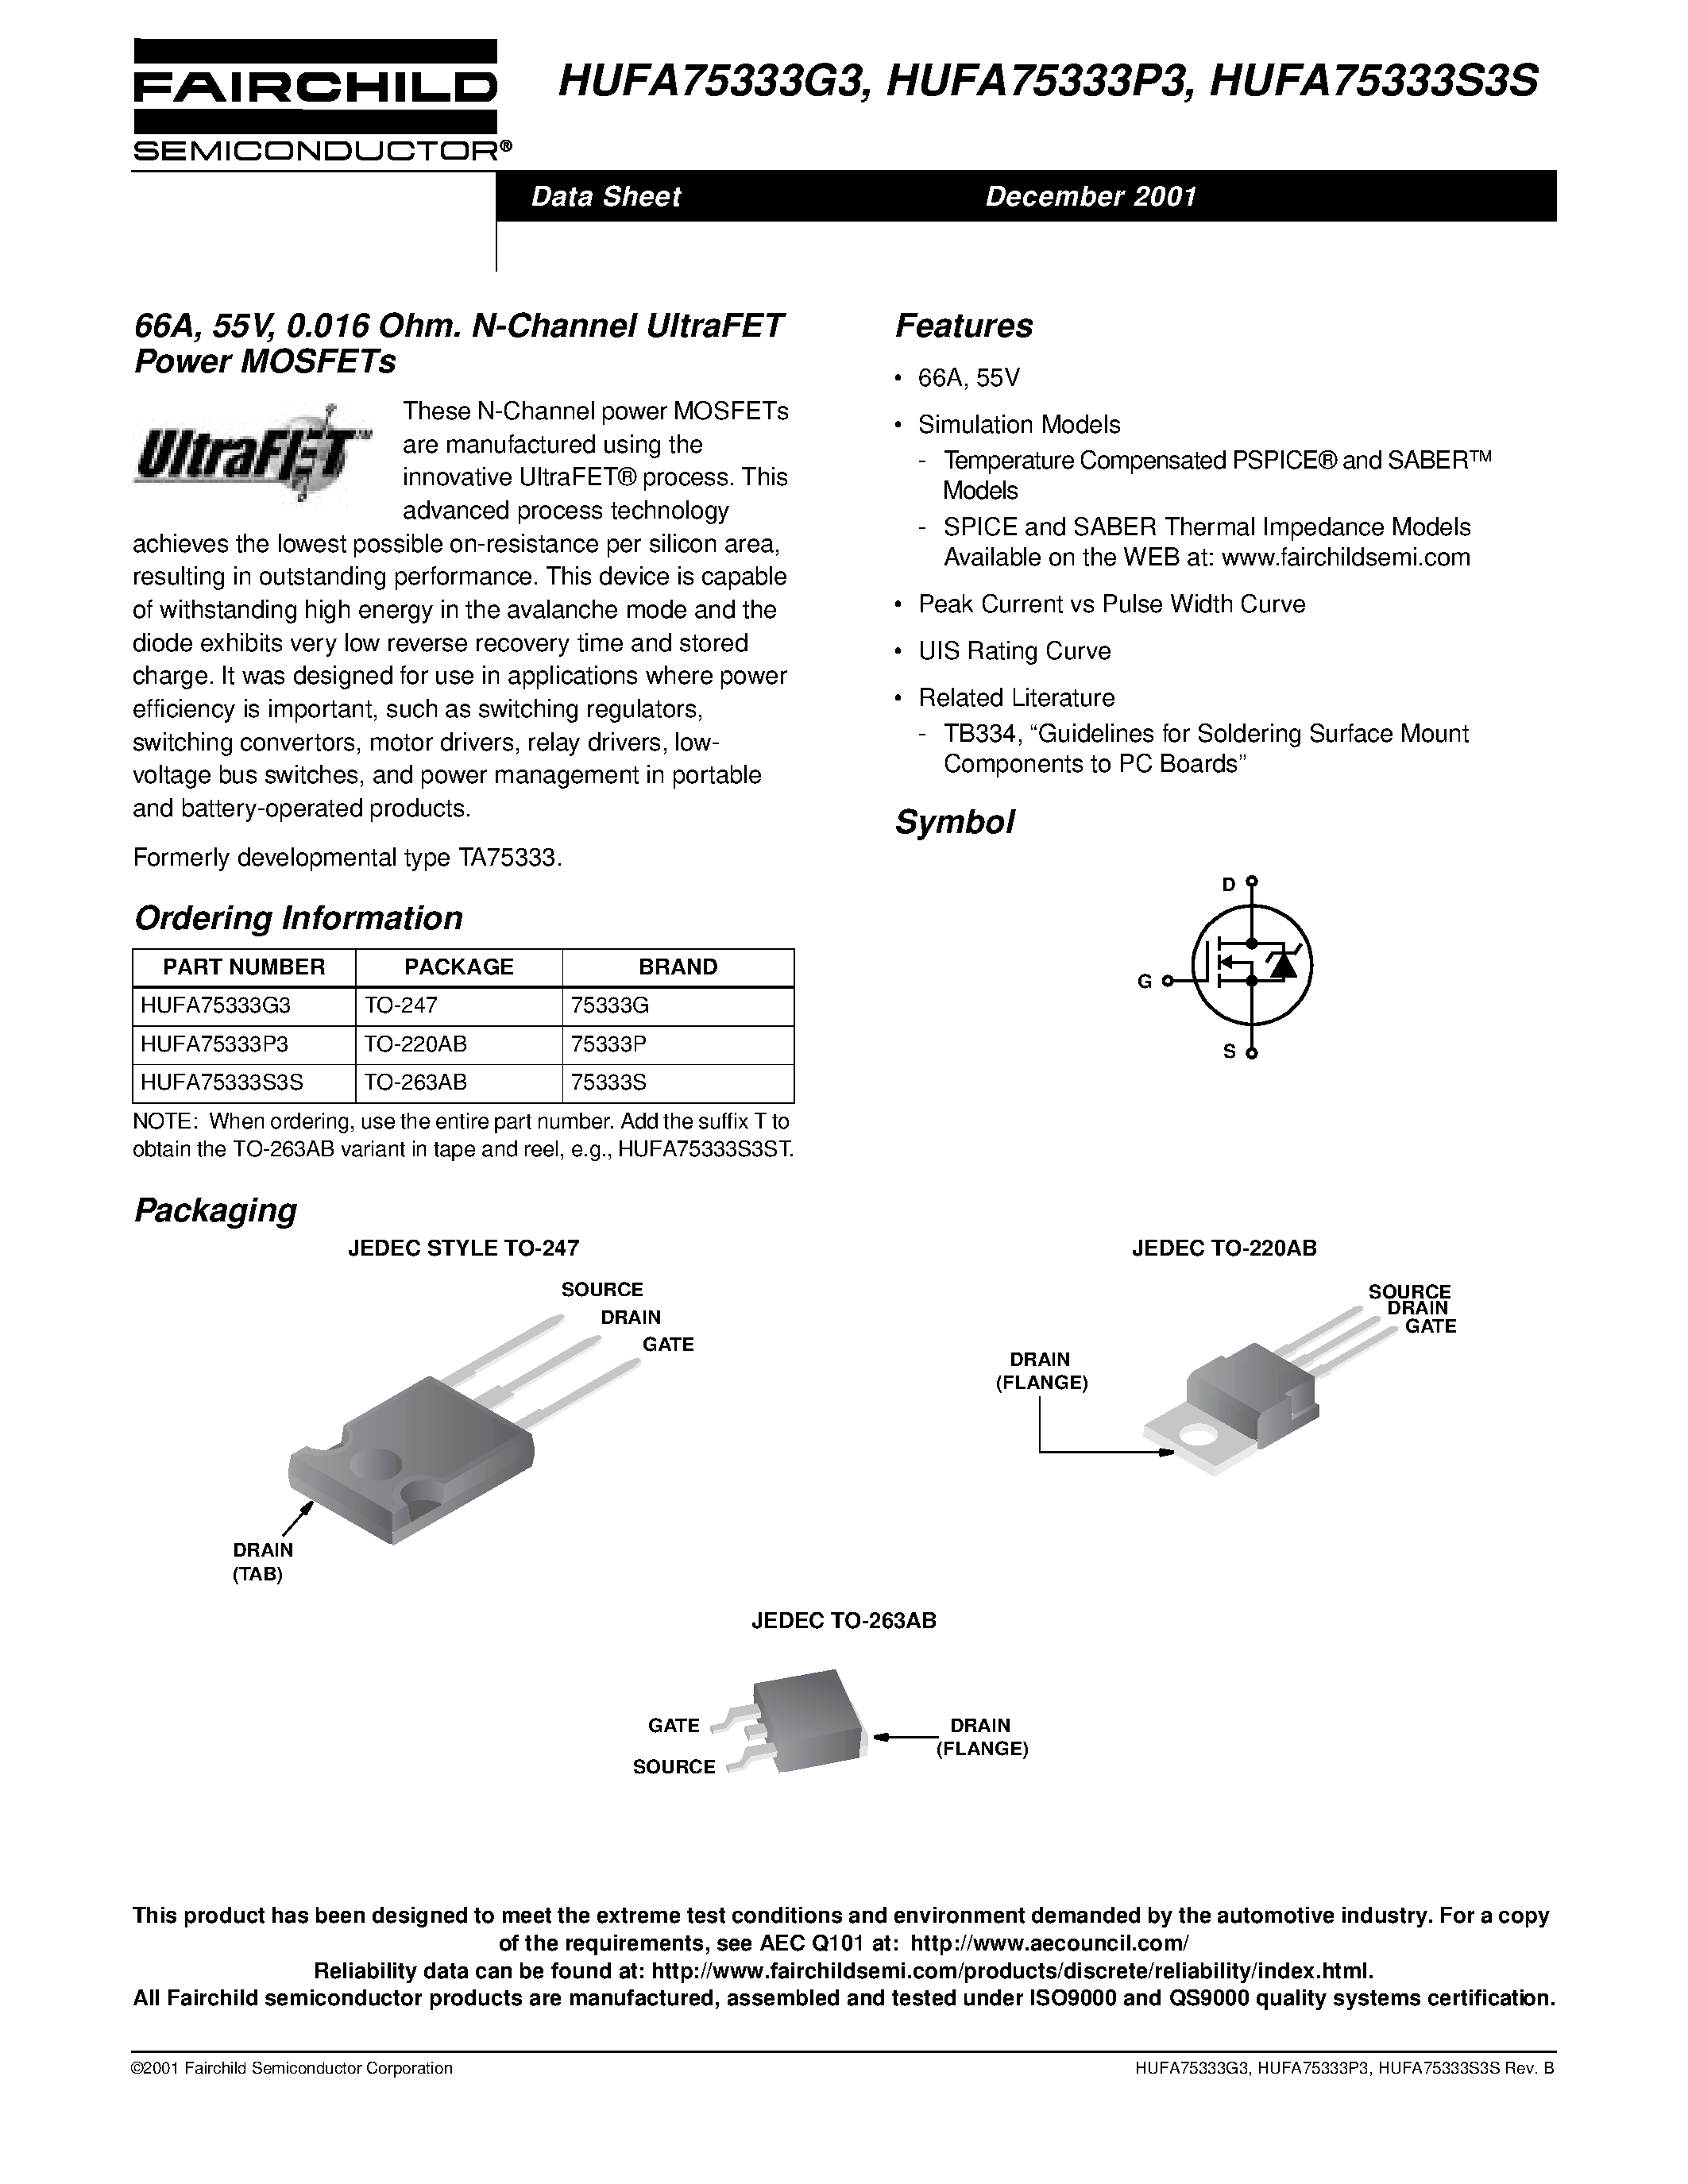 Даташит HUFA75329S3S - 49A/ 55V/ 0.024 Ohm/ N-Channel UltraFET Power MOSFETs страница 1